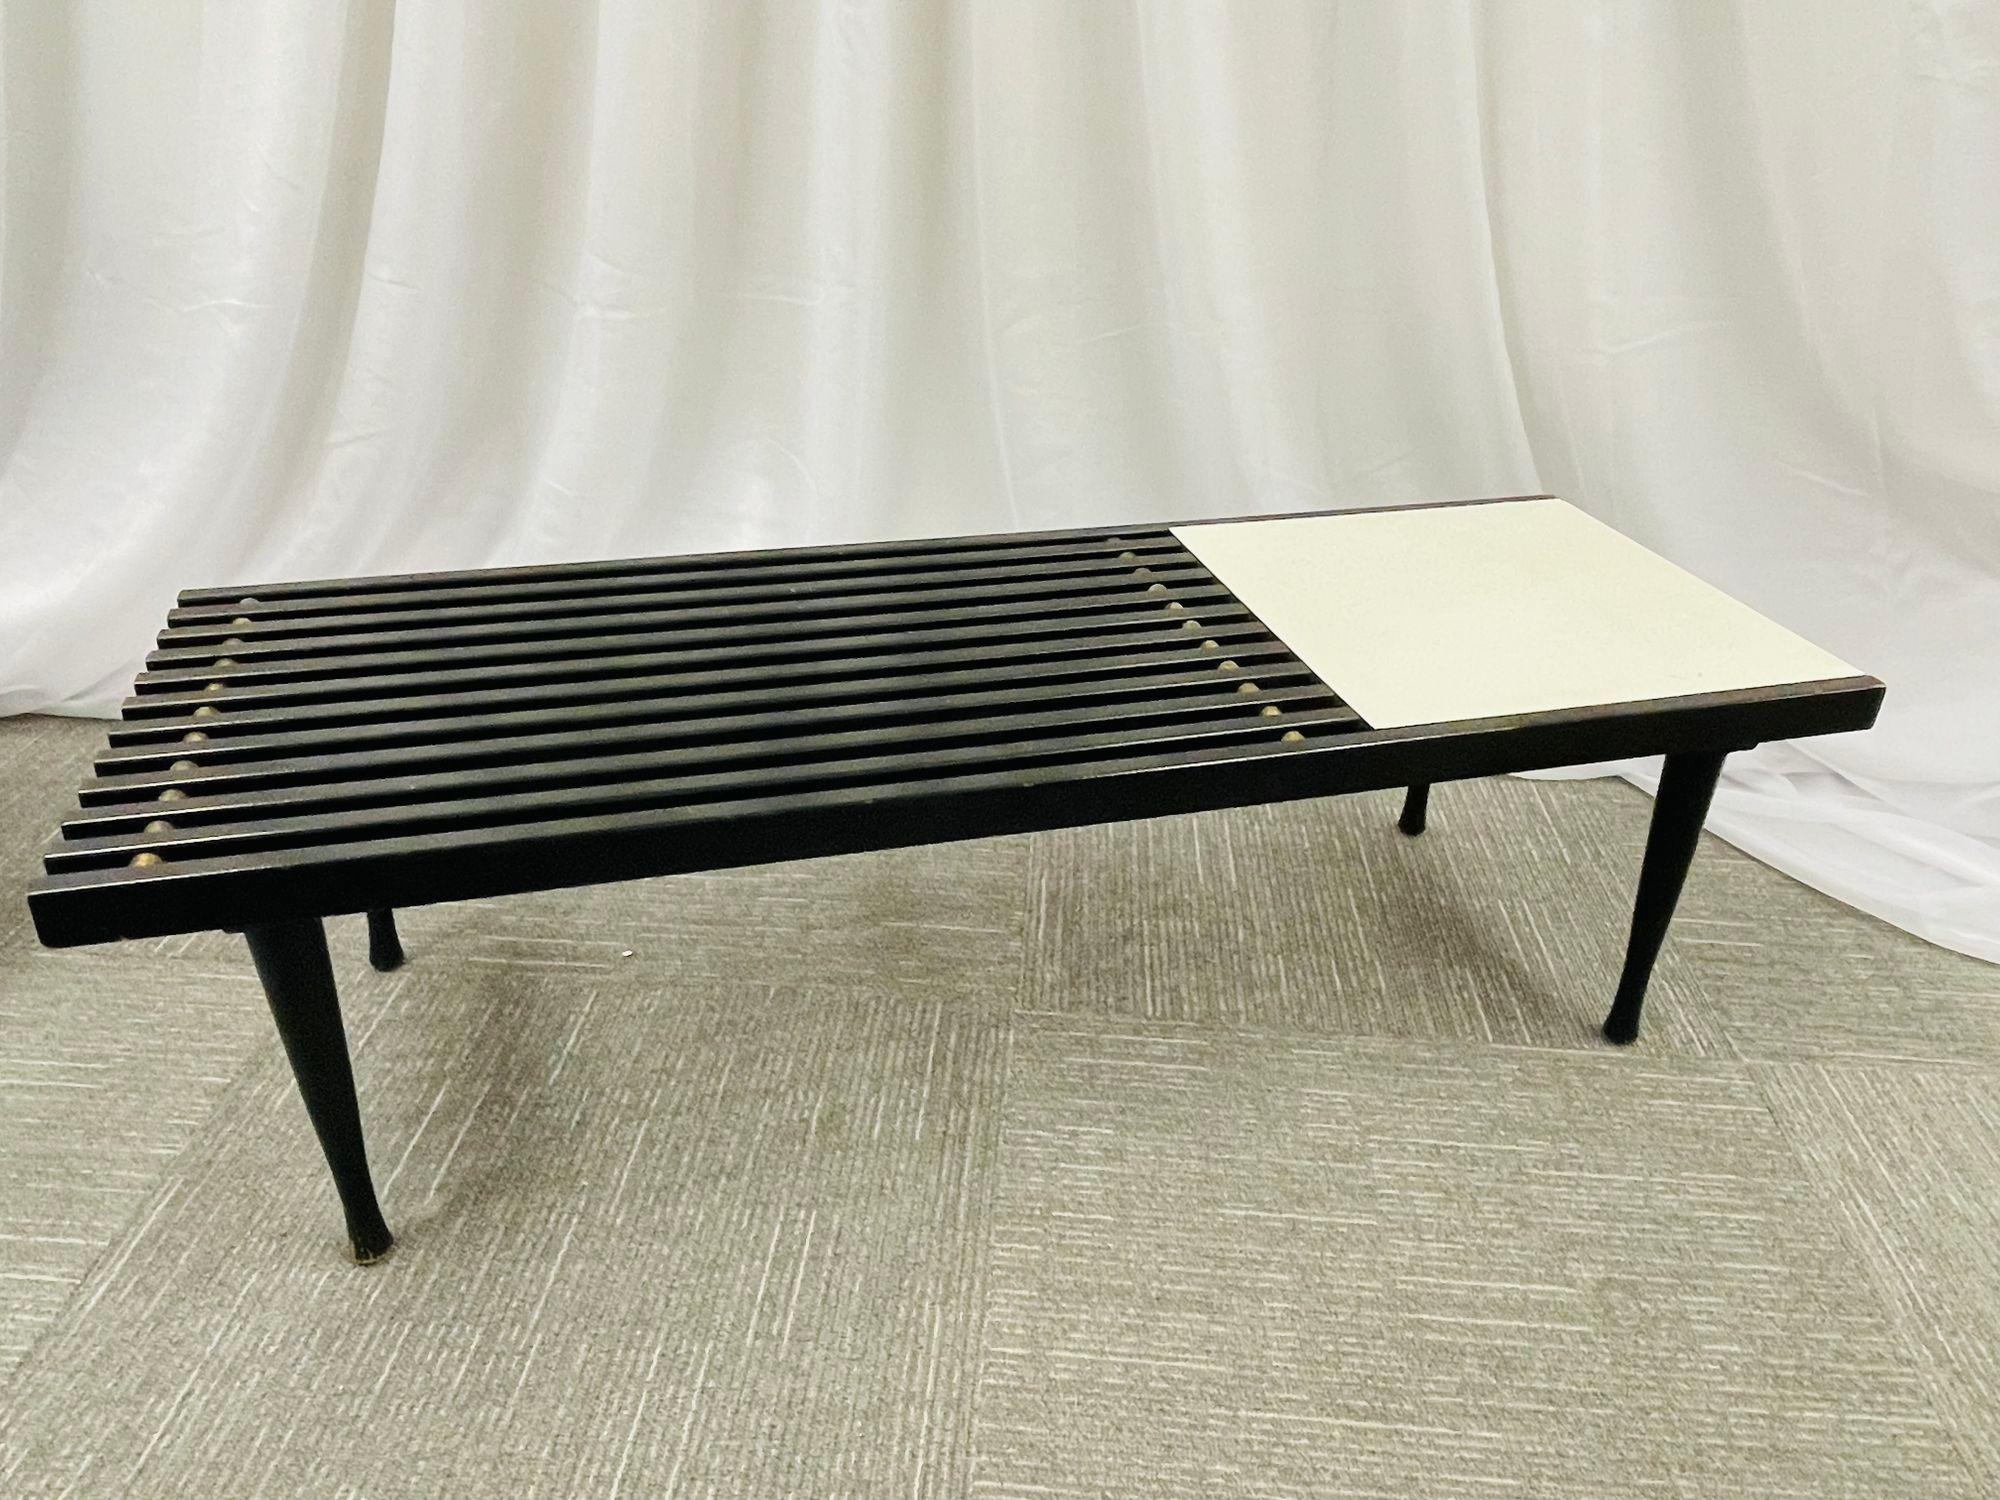 Mid-Century Modern Herman Miller George Nelson slat style brass and ebony coffee table or slat bench. Clean and sweet side or coffee cocktail table with a slat top and Formica side serving side.
Part of our enormous collection of custom black and